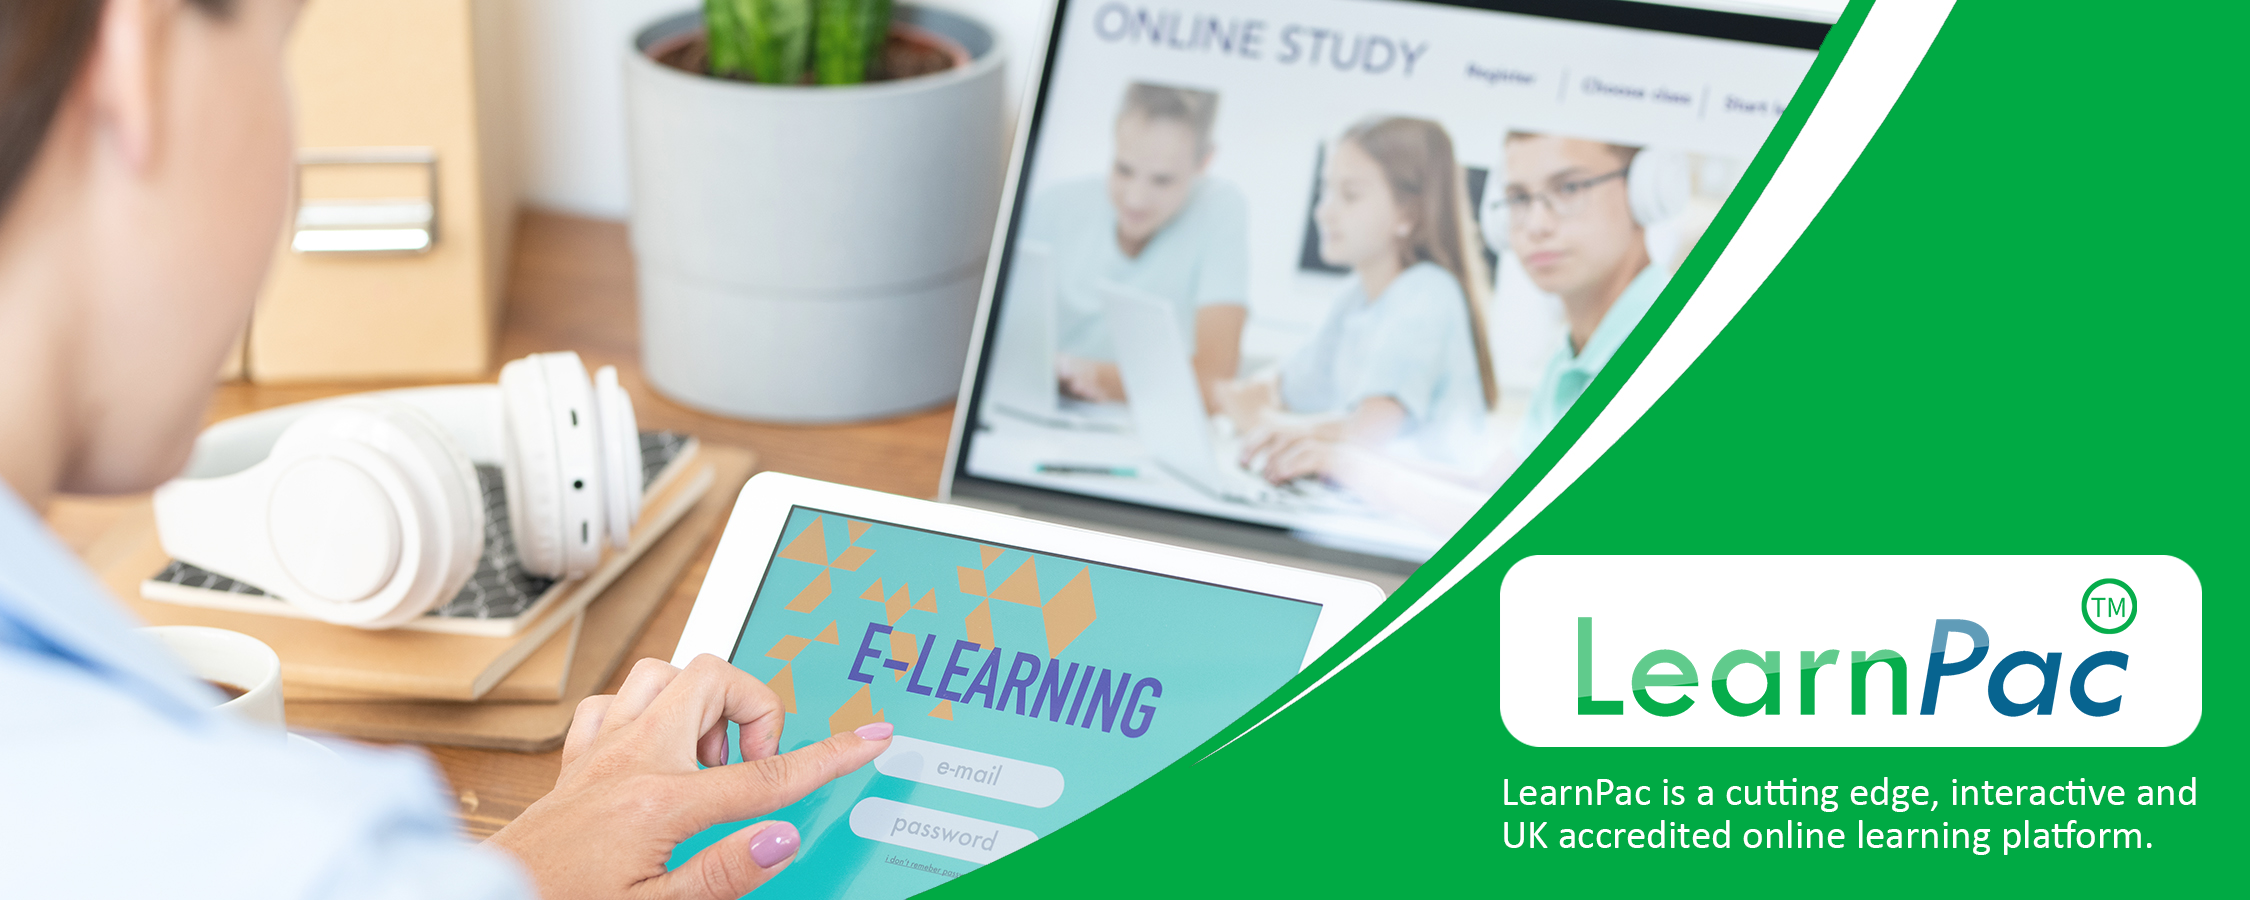 Managing Absence - Enhanced Dental CPD Course - Online Learning Courses - E-Learning Courses - LearnPac Systems UK --